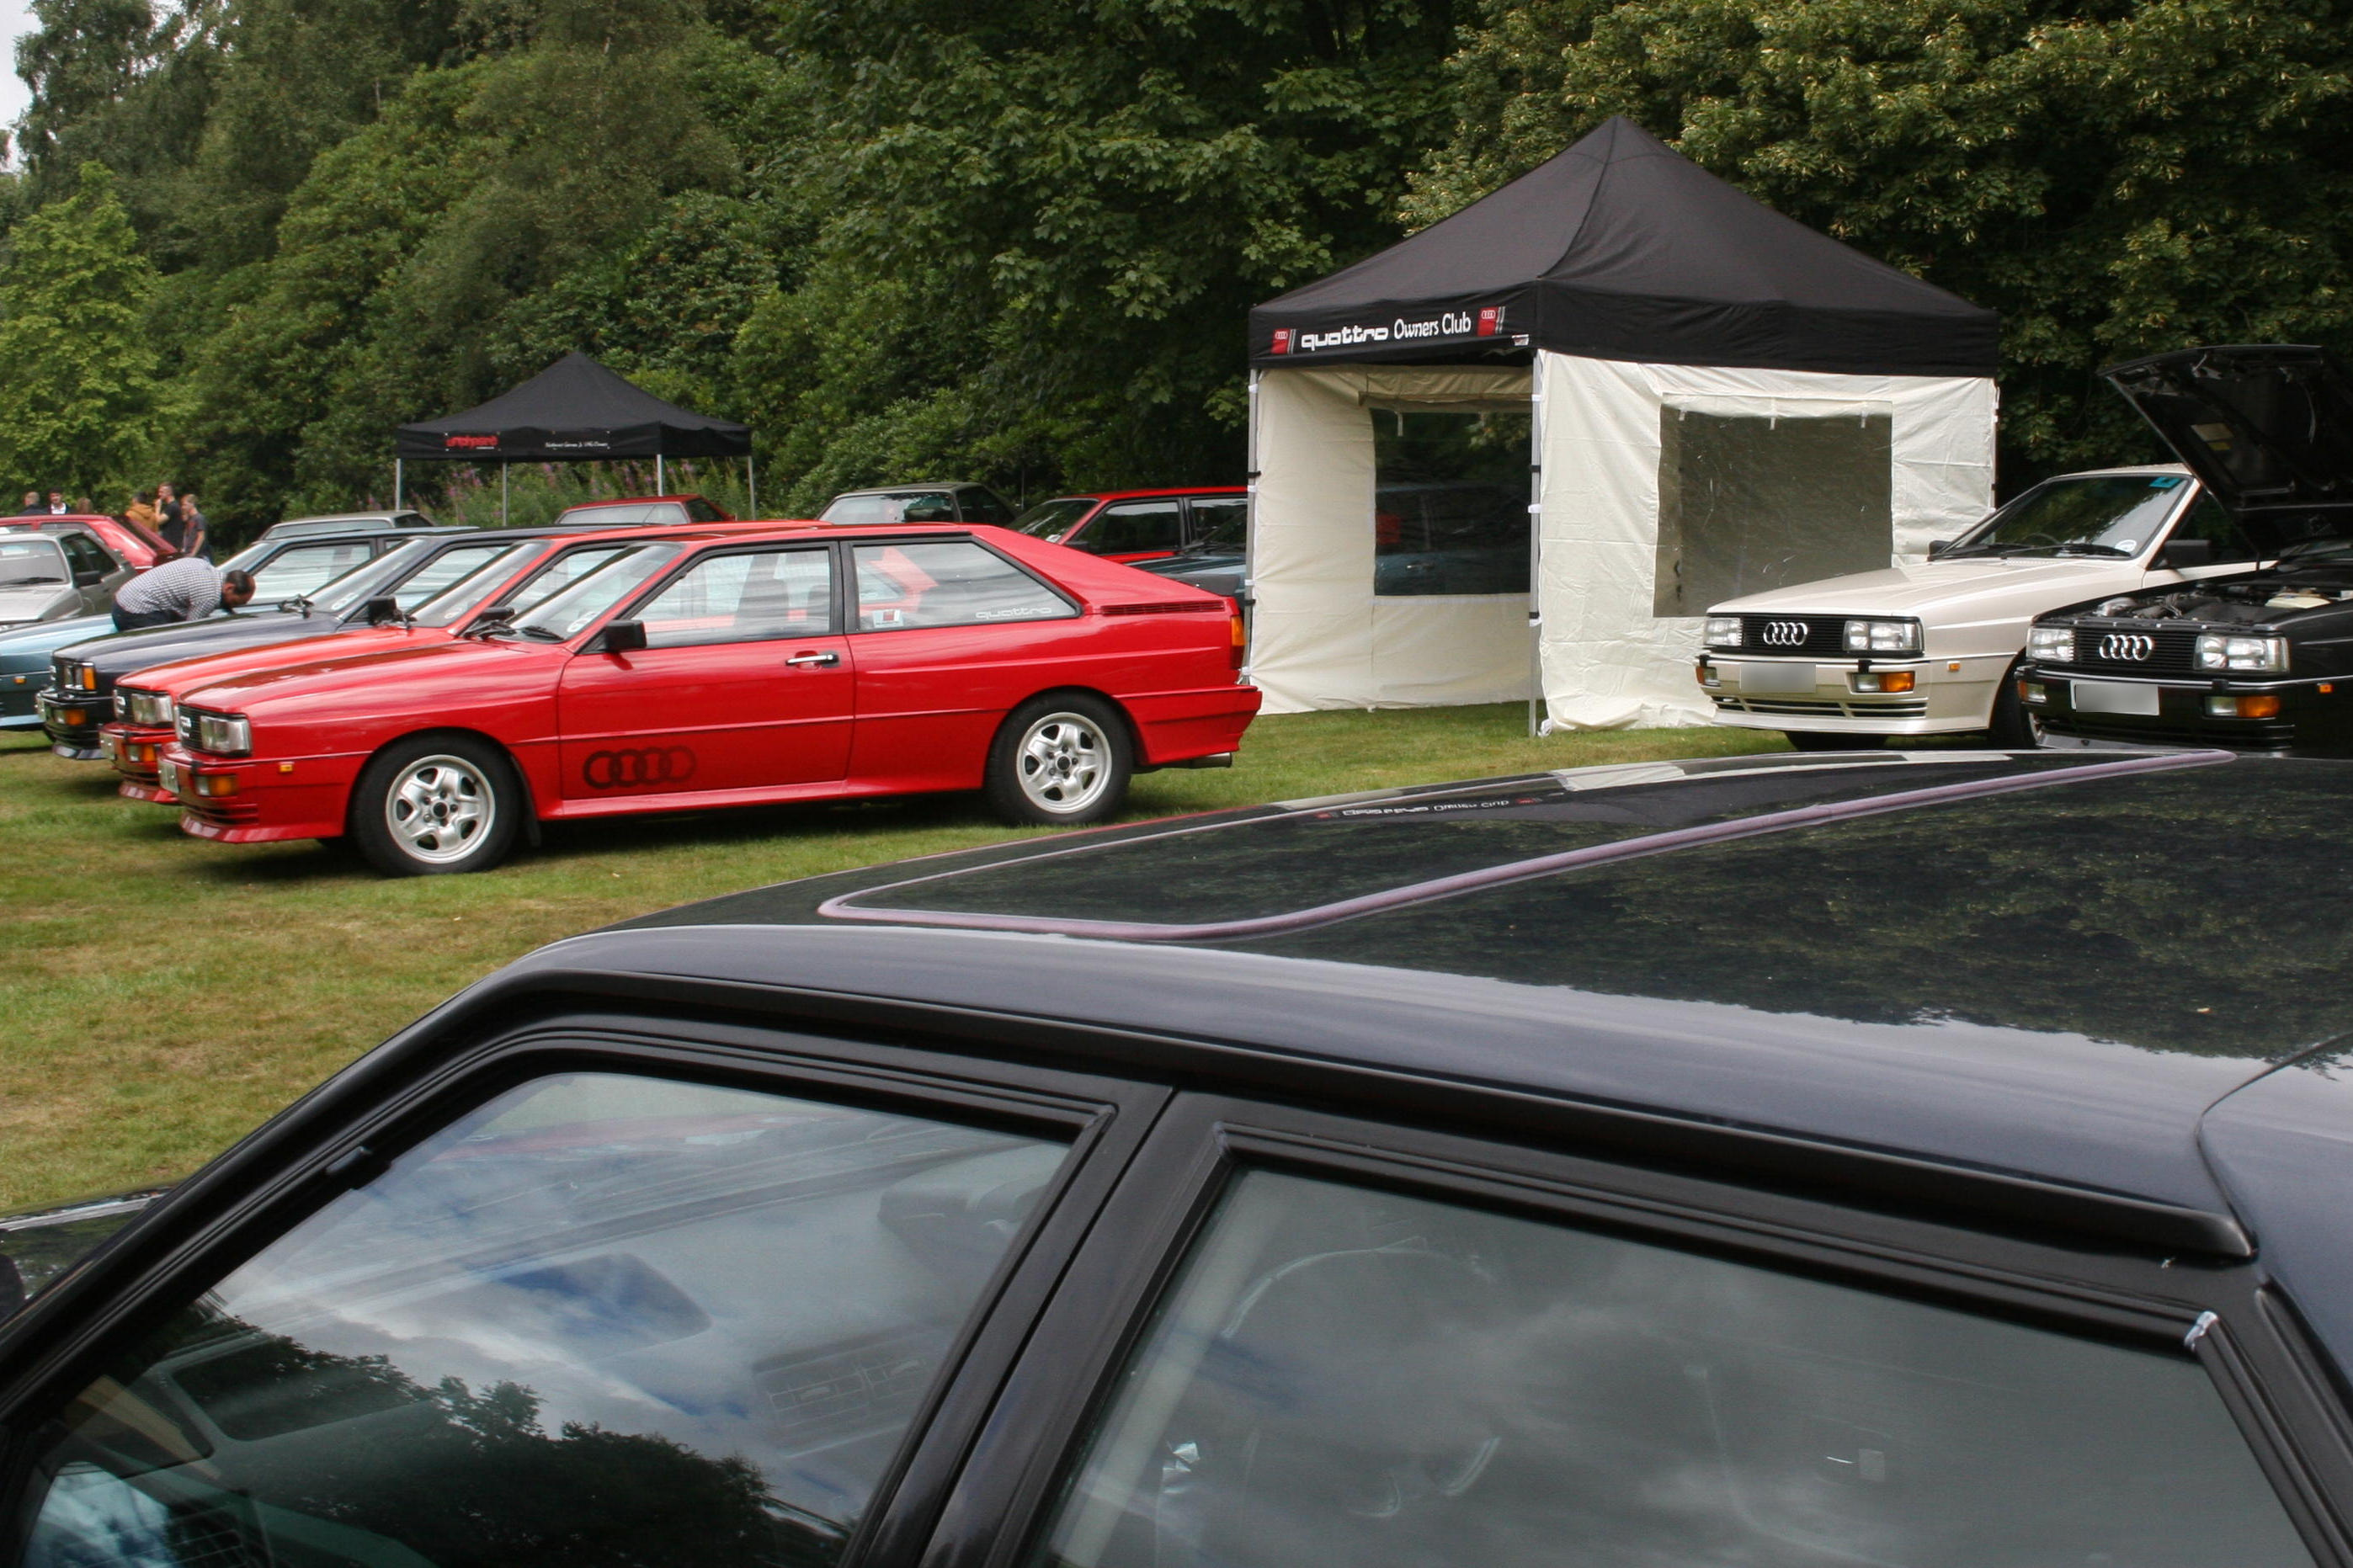 Members can join-in and attend classic car shows throughout the UK